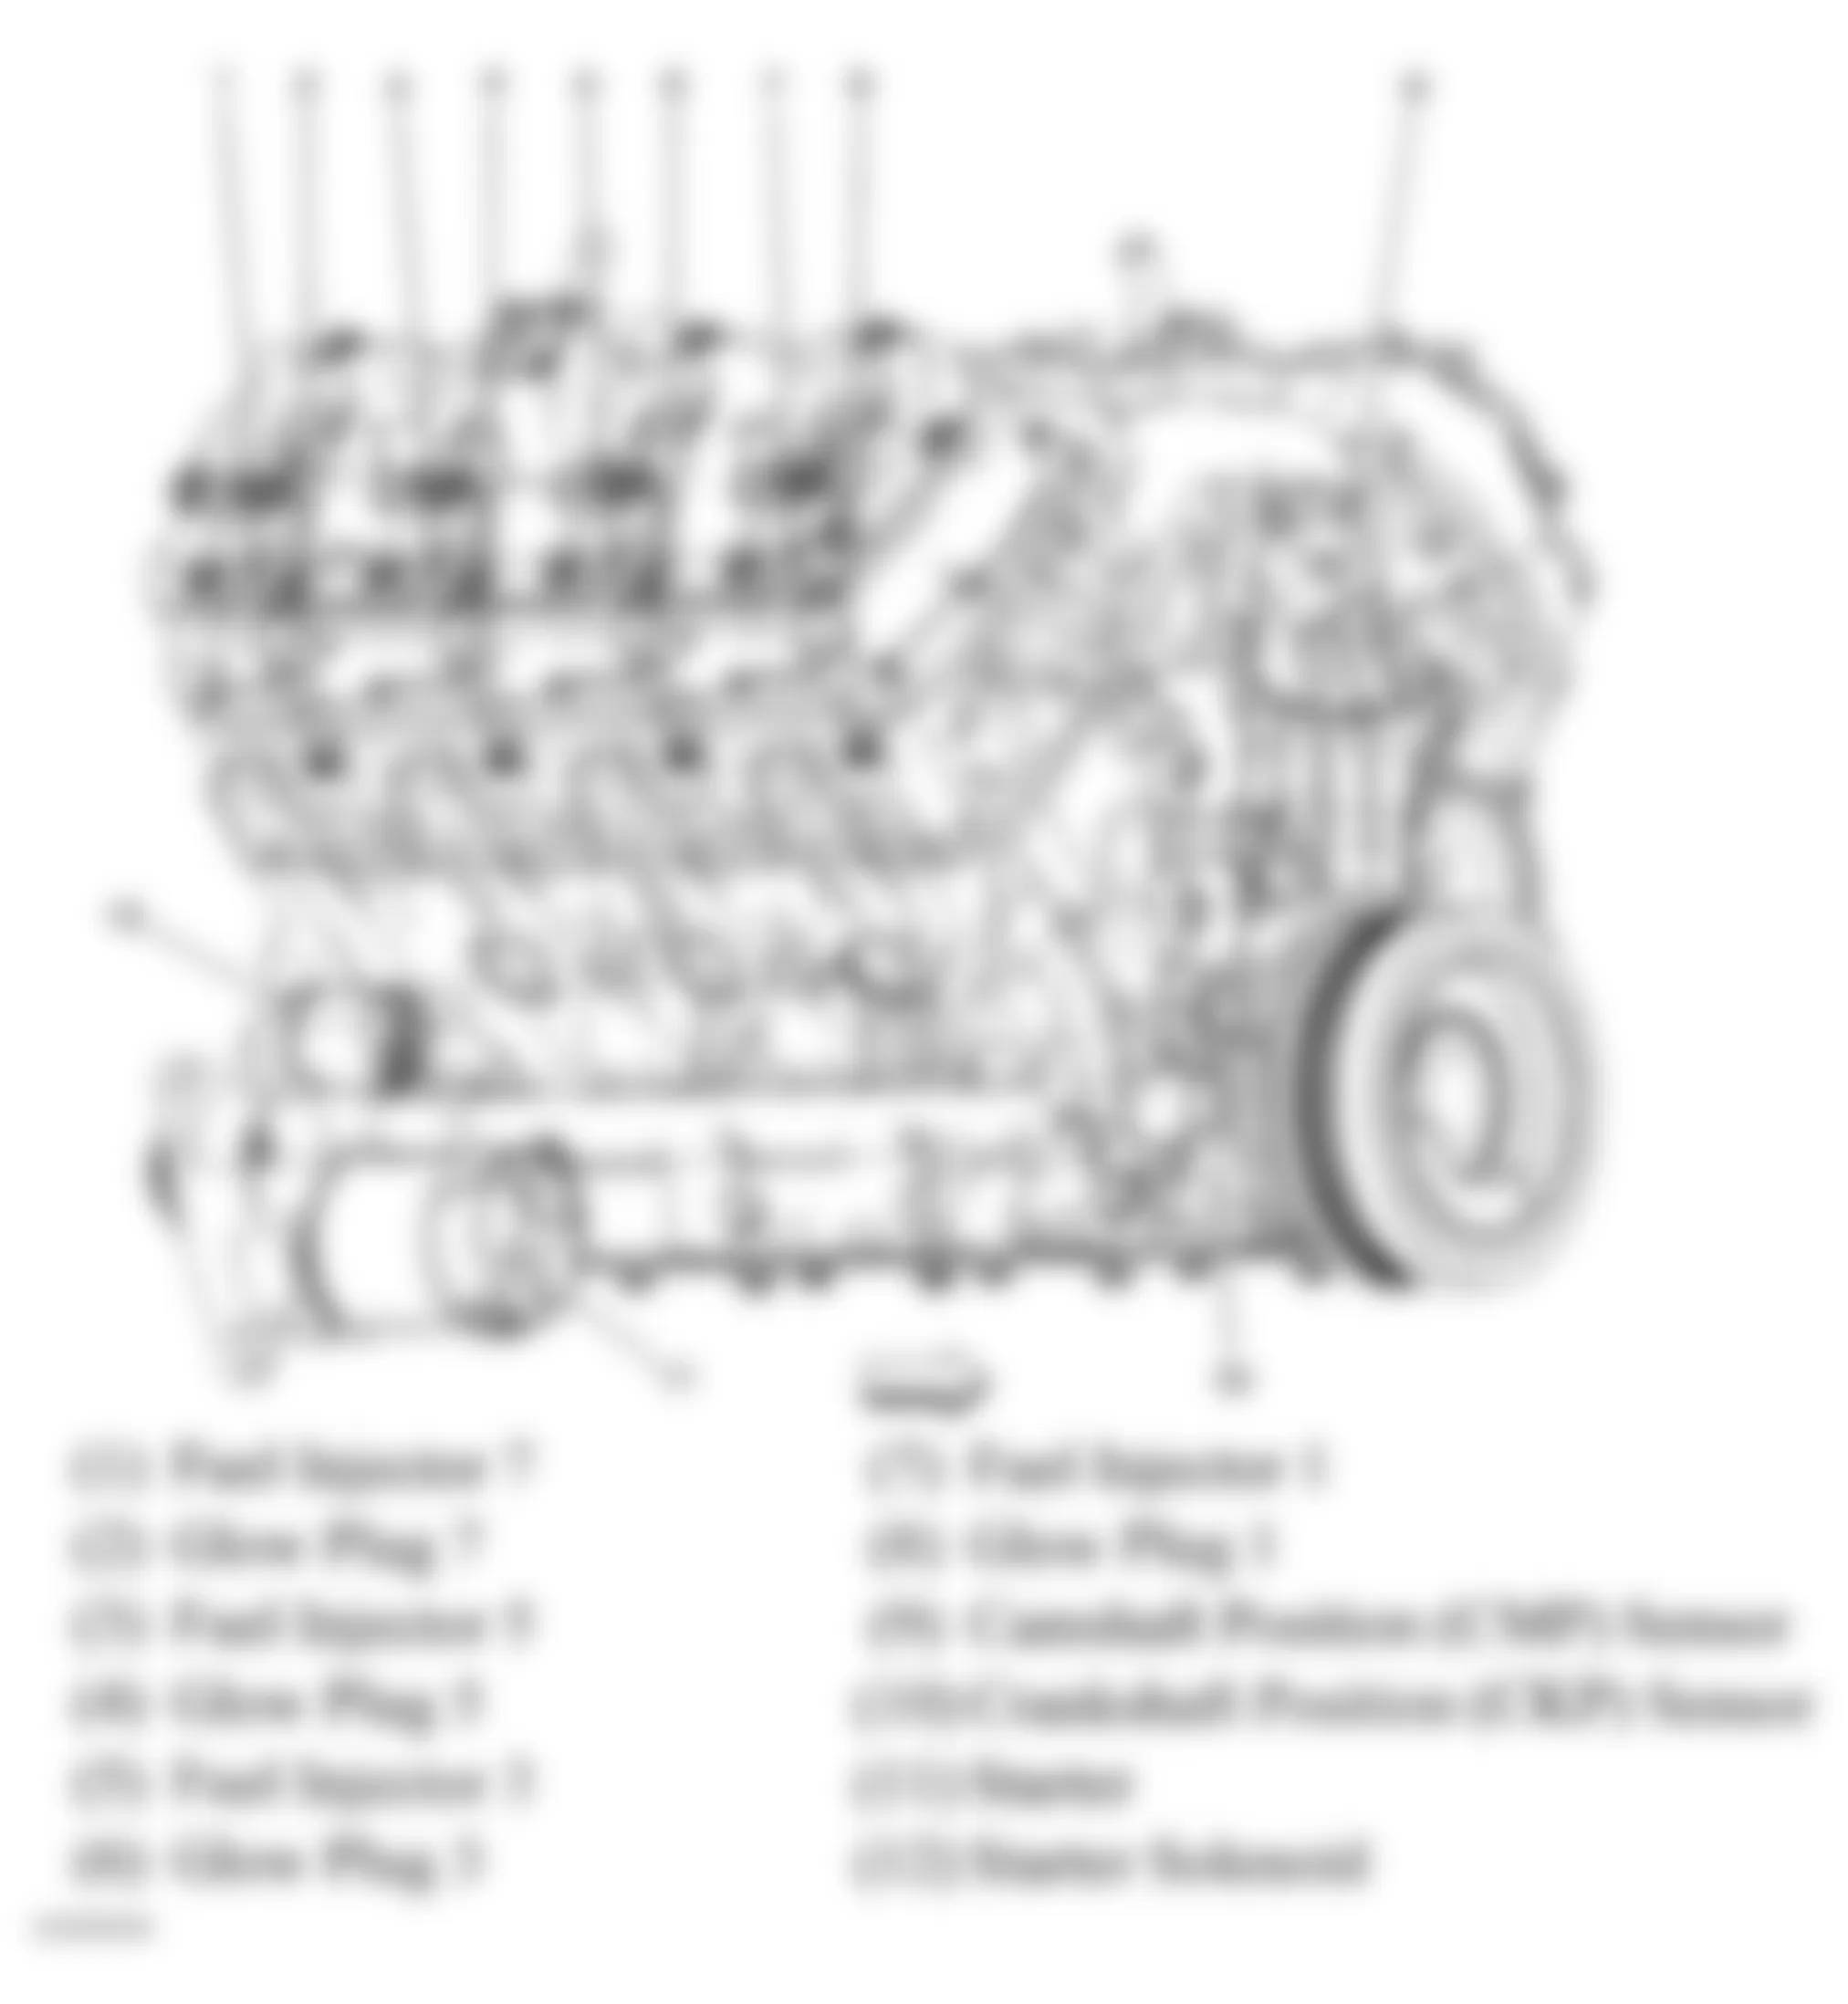 GMC Savana G2500 2007 - Component Locations -  Right Side Of Engine (6.6L)